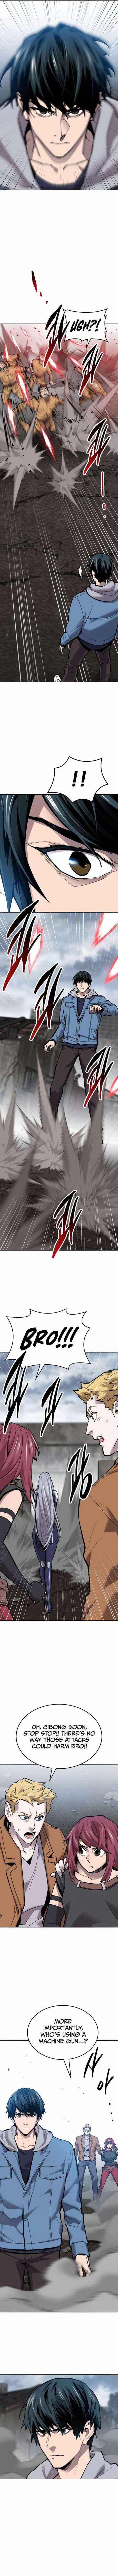 Limit Breaker Chapter 115 Page 7